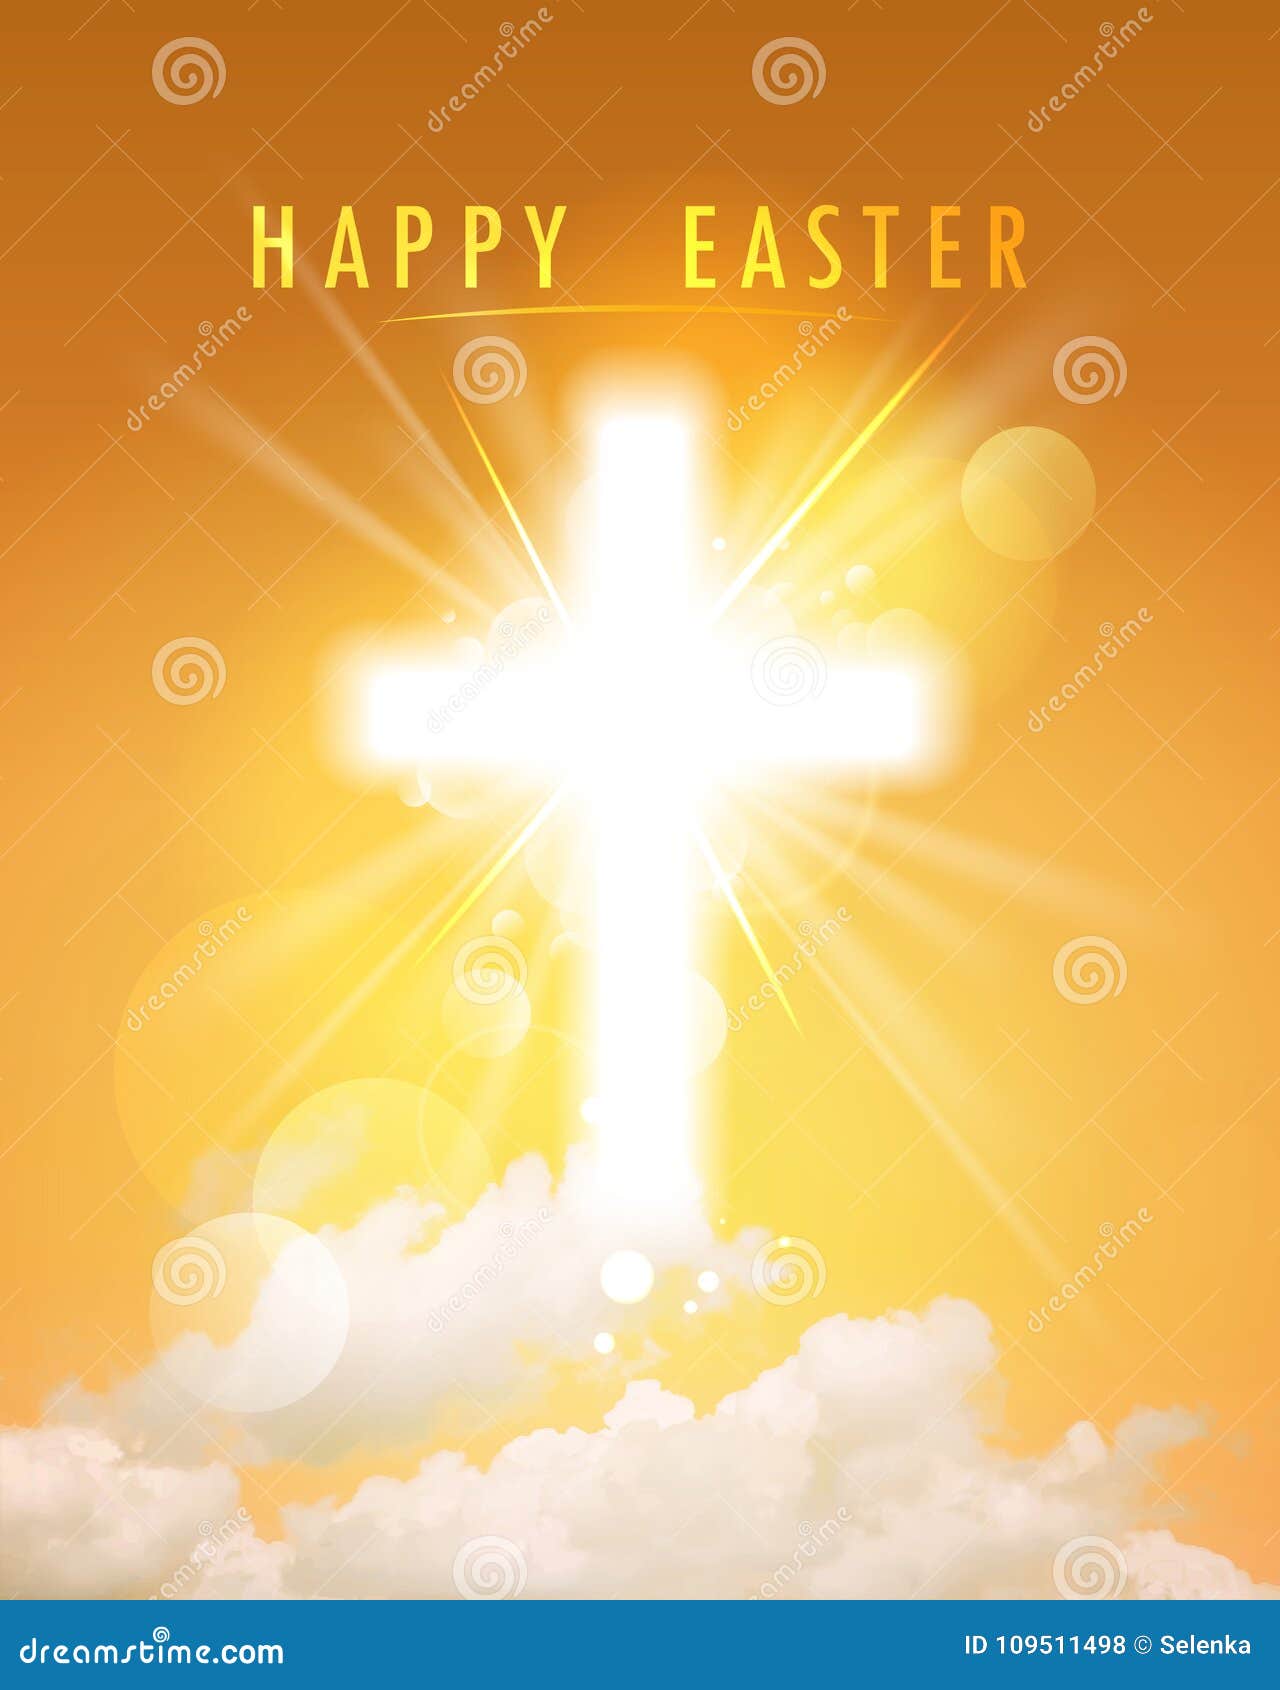 happy easter religious card